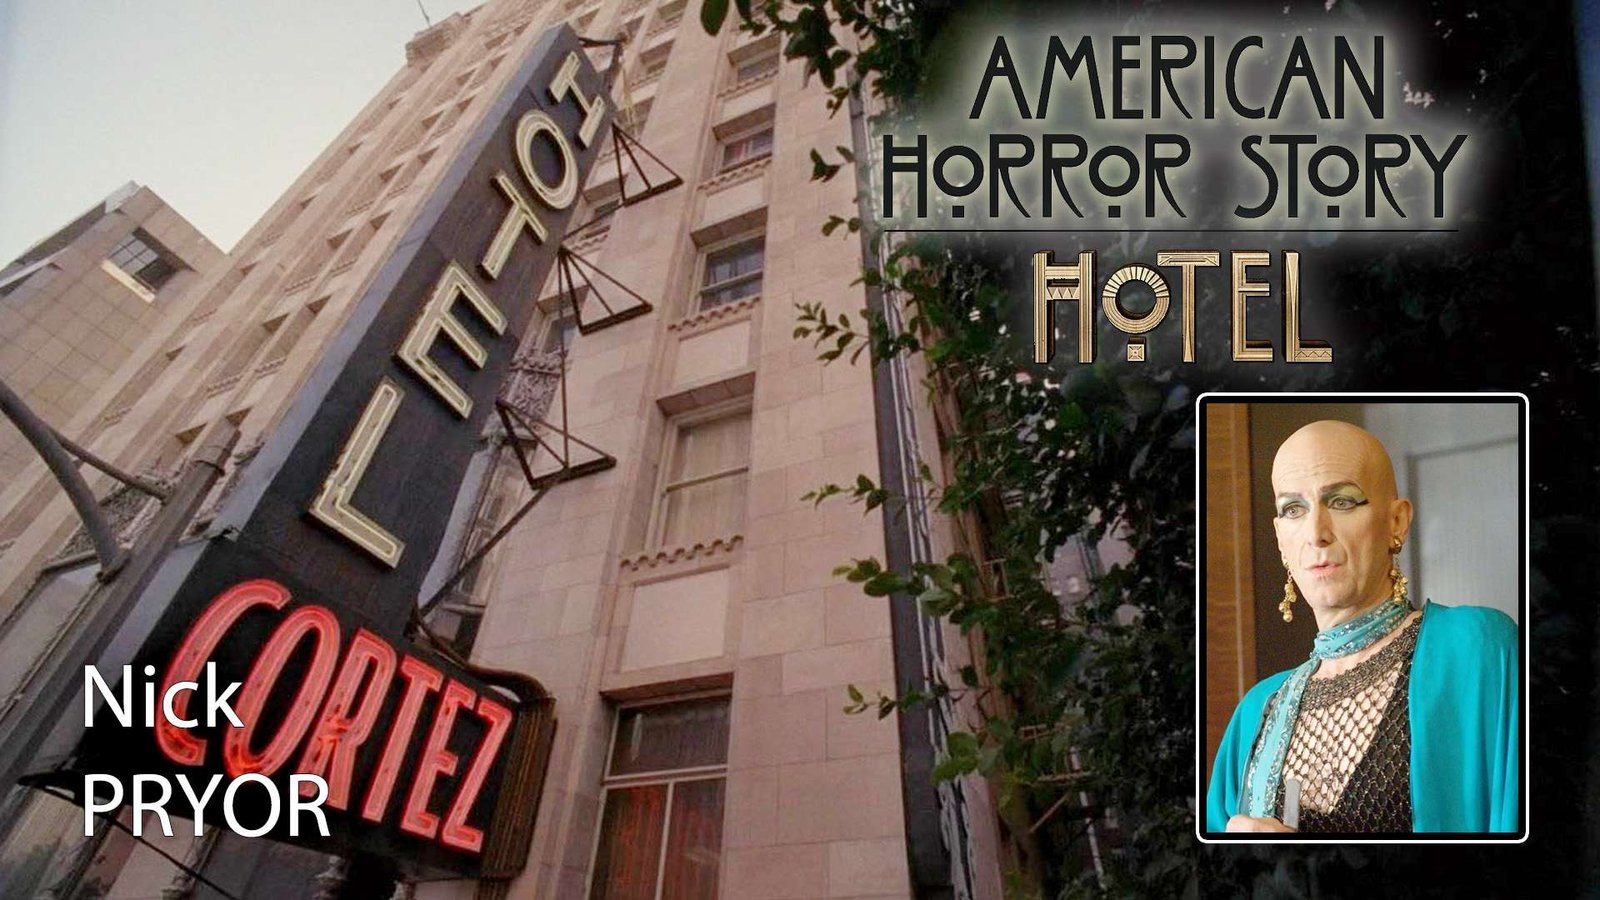 Fiche-personnage-AHS5-nick-pryor